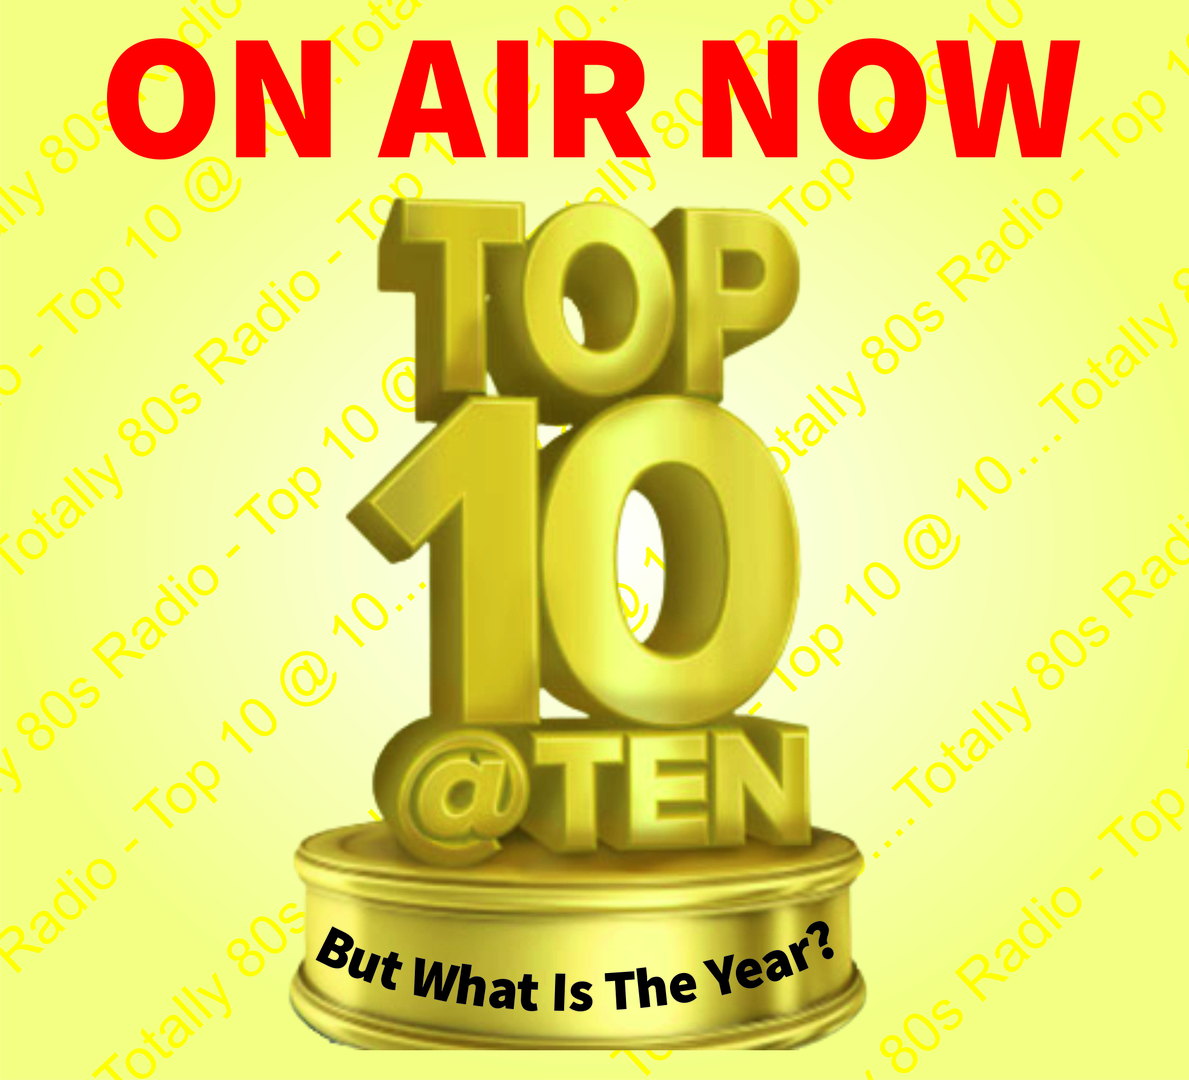 ON AIR now it's the Top 10 at 10, but what is the year? Listen on totally80sradio.co.uk or at radio garden on ift.tt/P7HzIgo